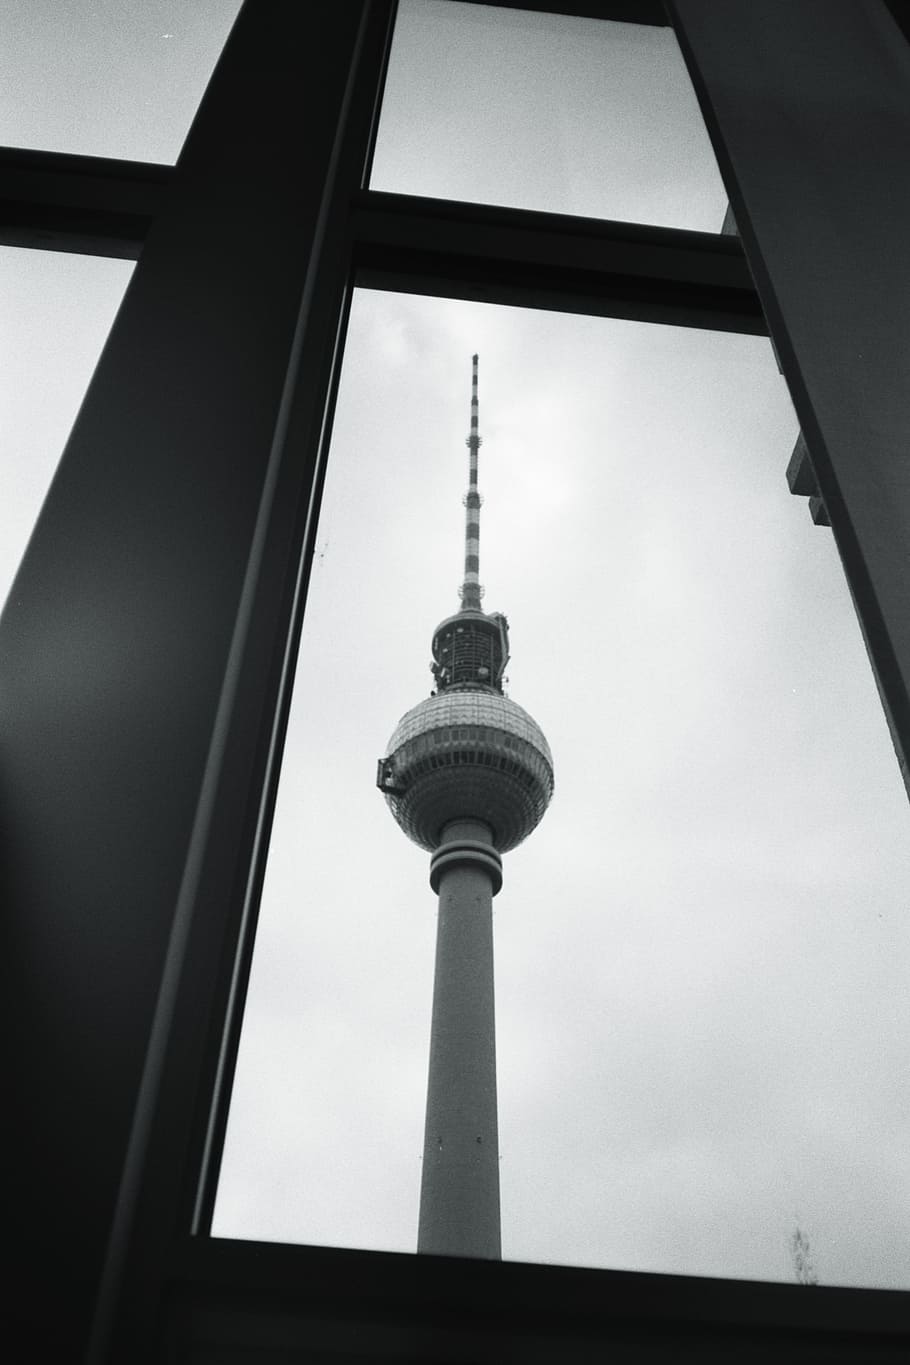 berlin, tv tower, window, black and white, architecture, germany